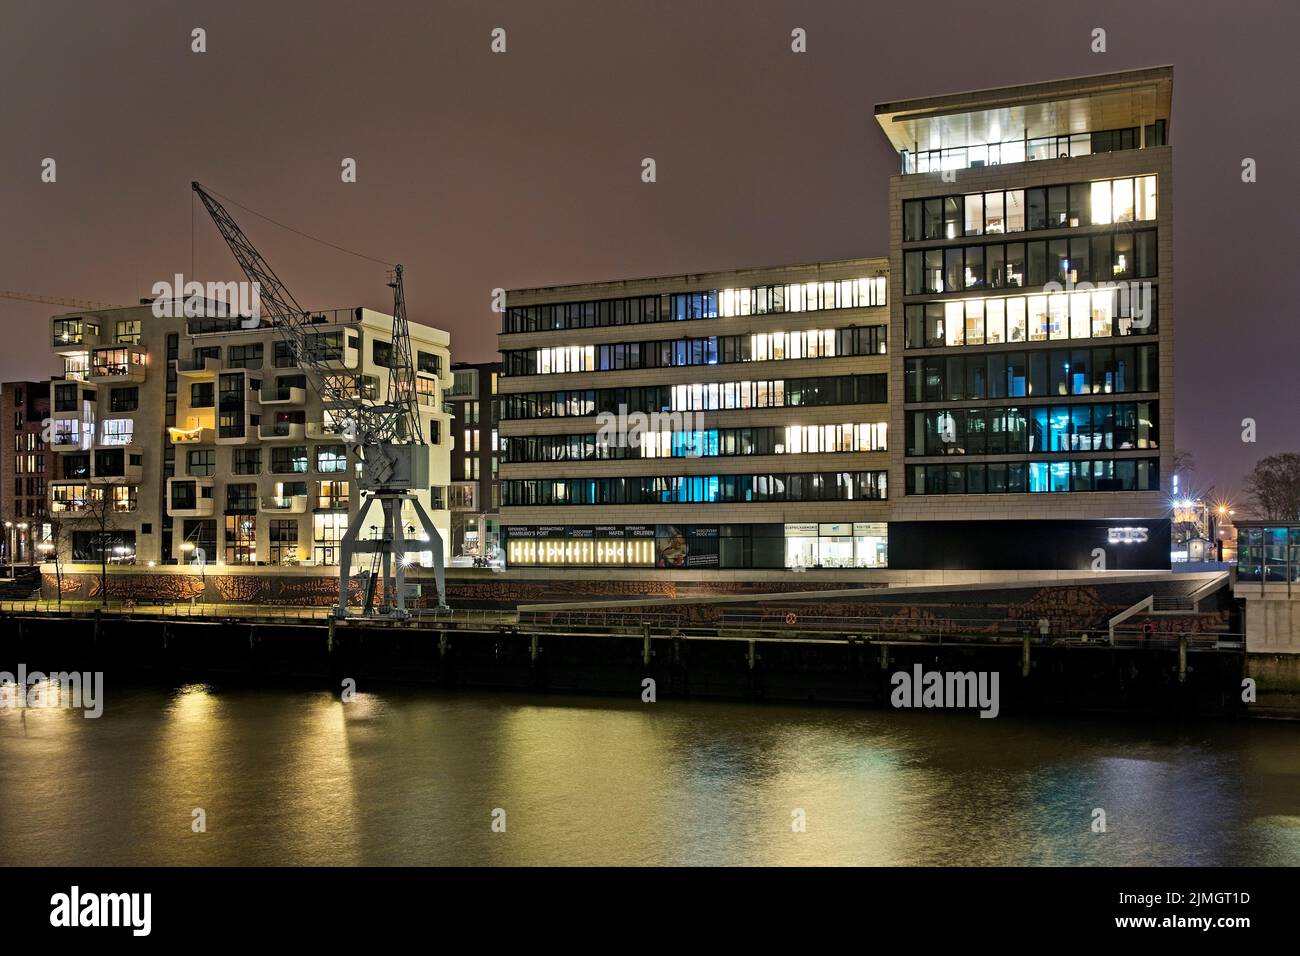 Kaiserkai at Night, HafenCity, Hambourg, Allemagne, Europe Banque D'Images